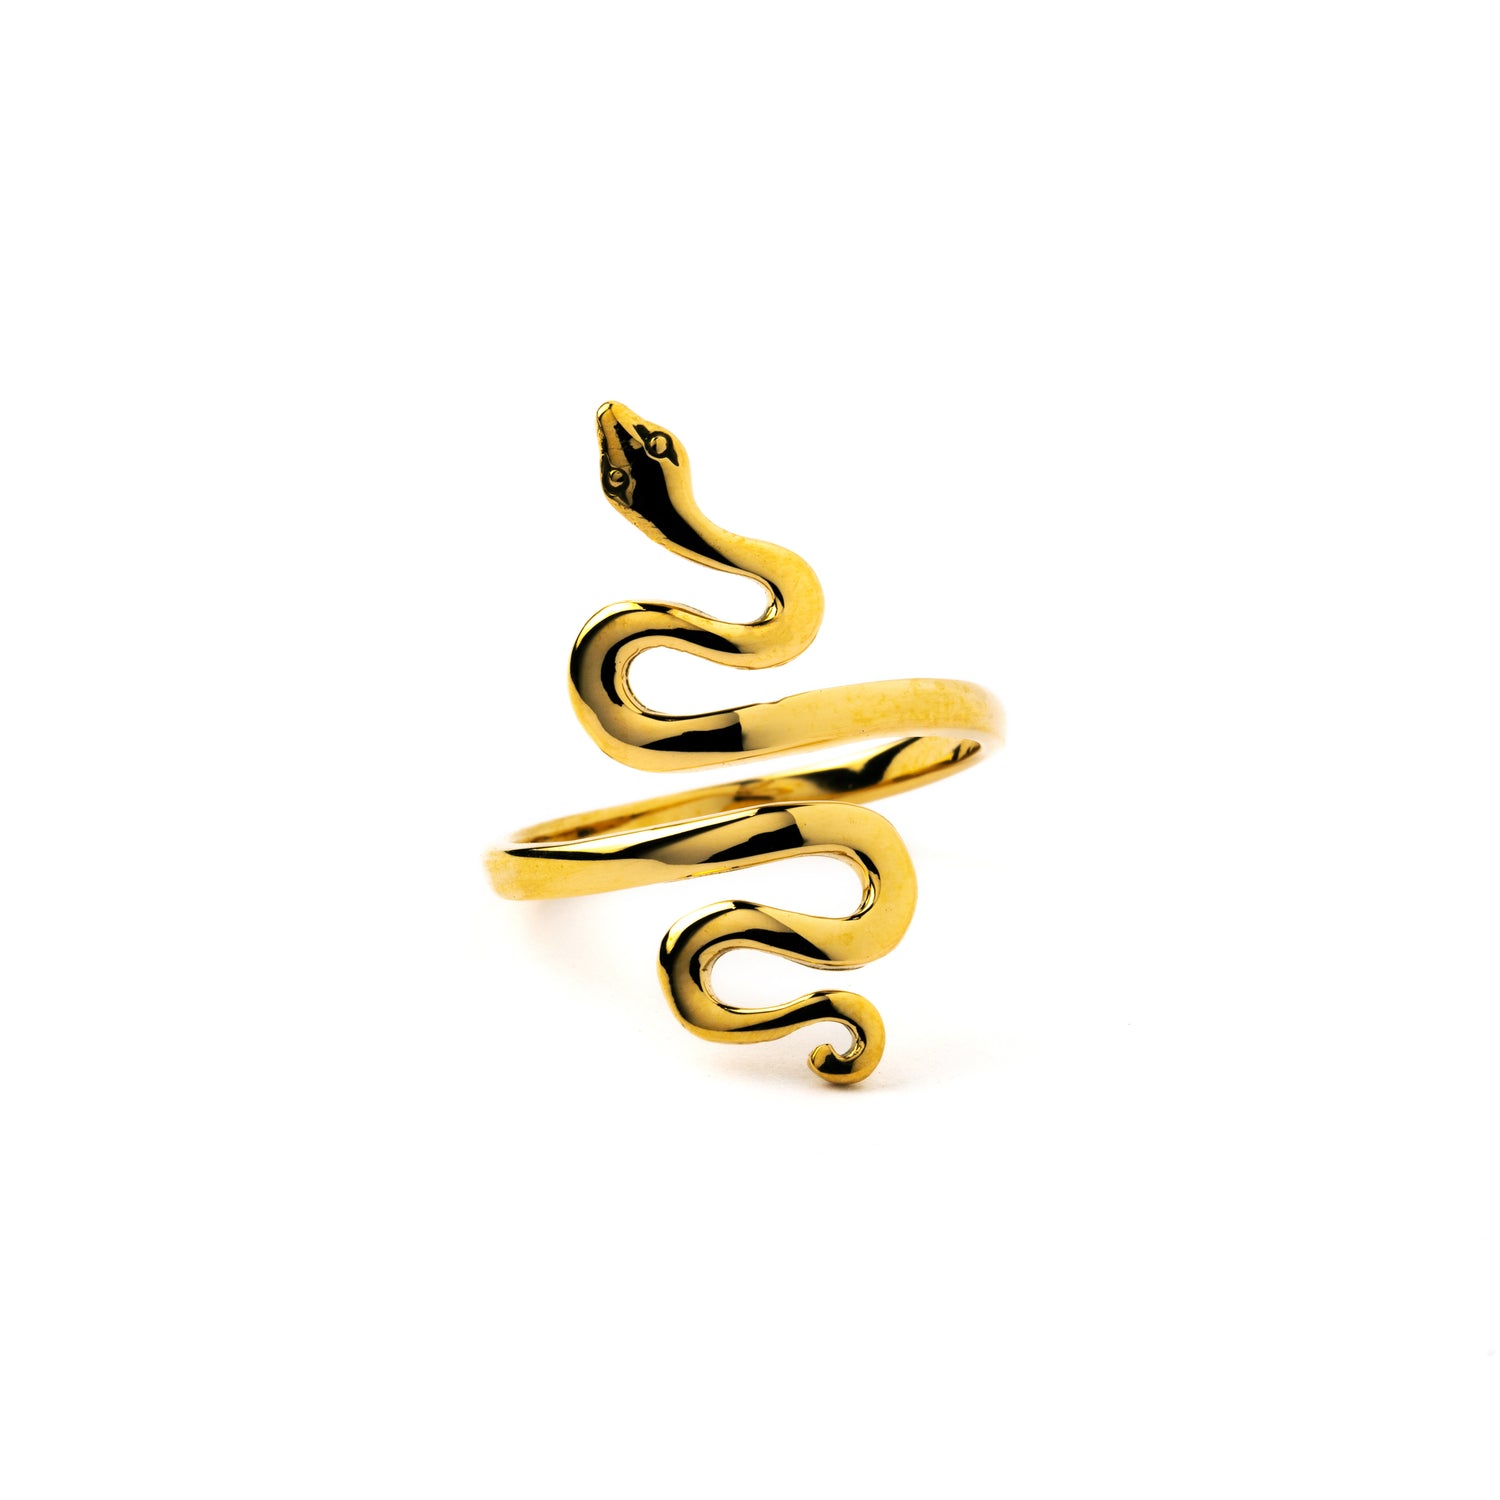 Bronze Snake Ring frontal view